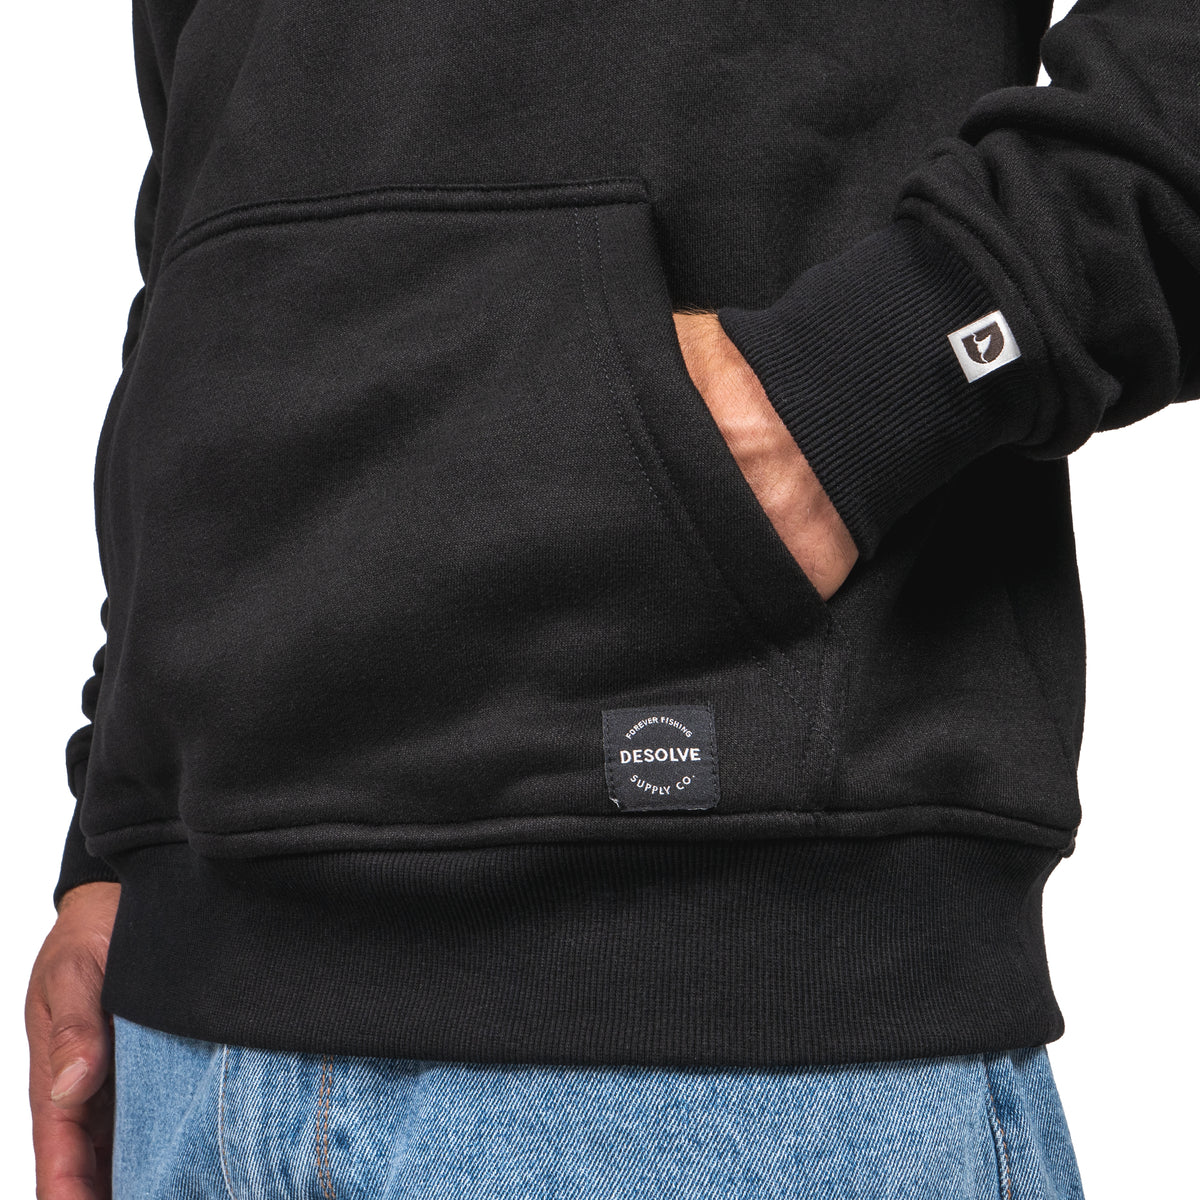 Desolve Supply Co | Outrigger Hoodie - Desolve Supply Co. | NZ